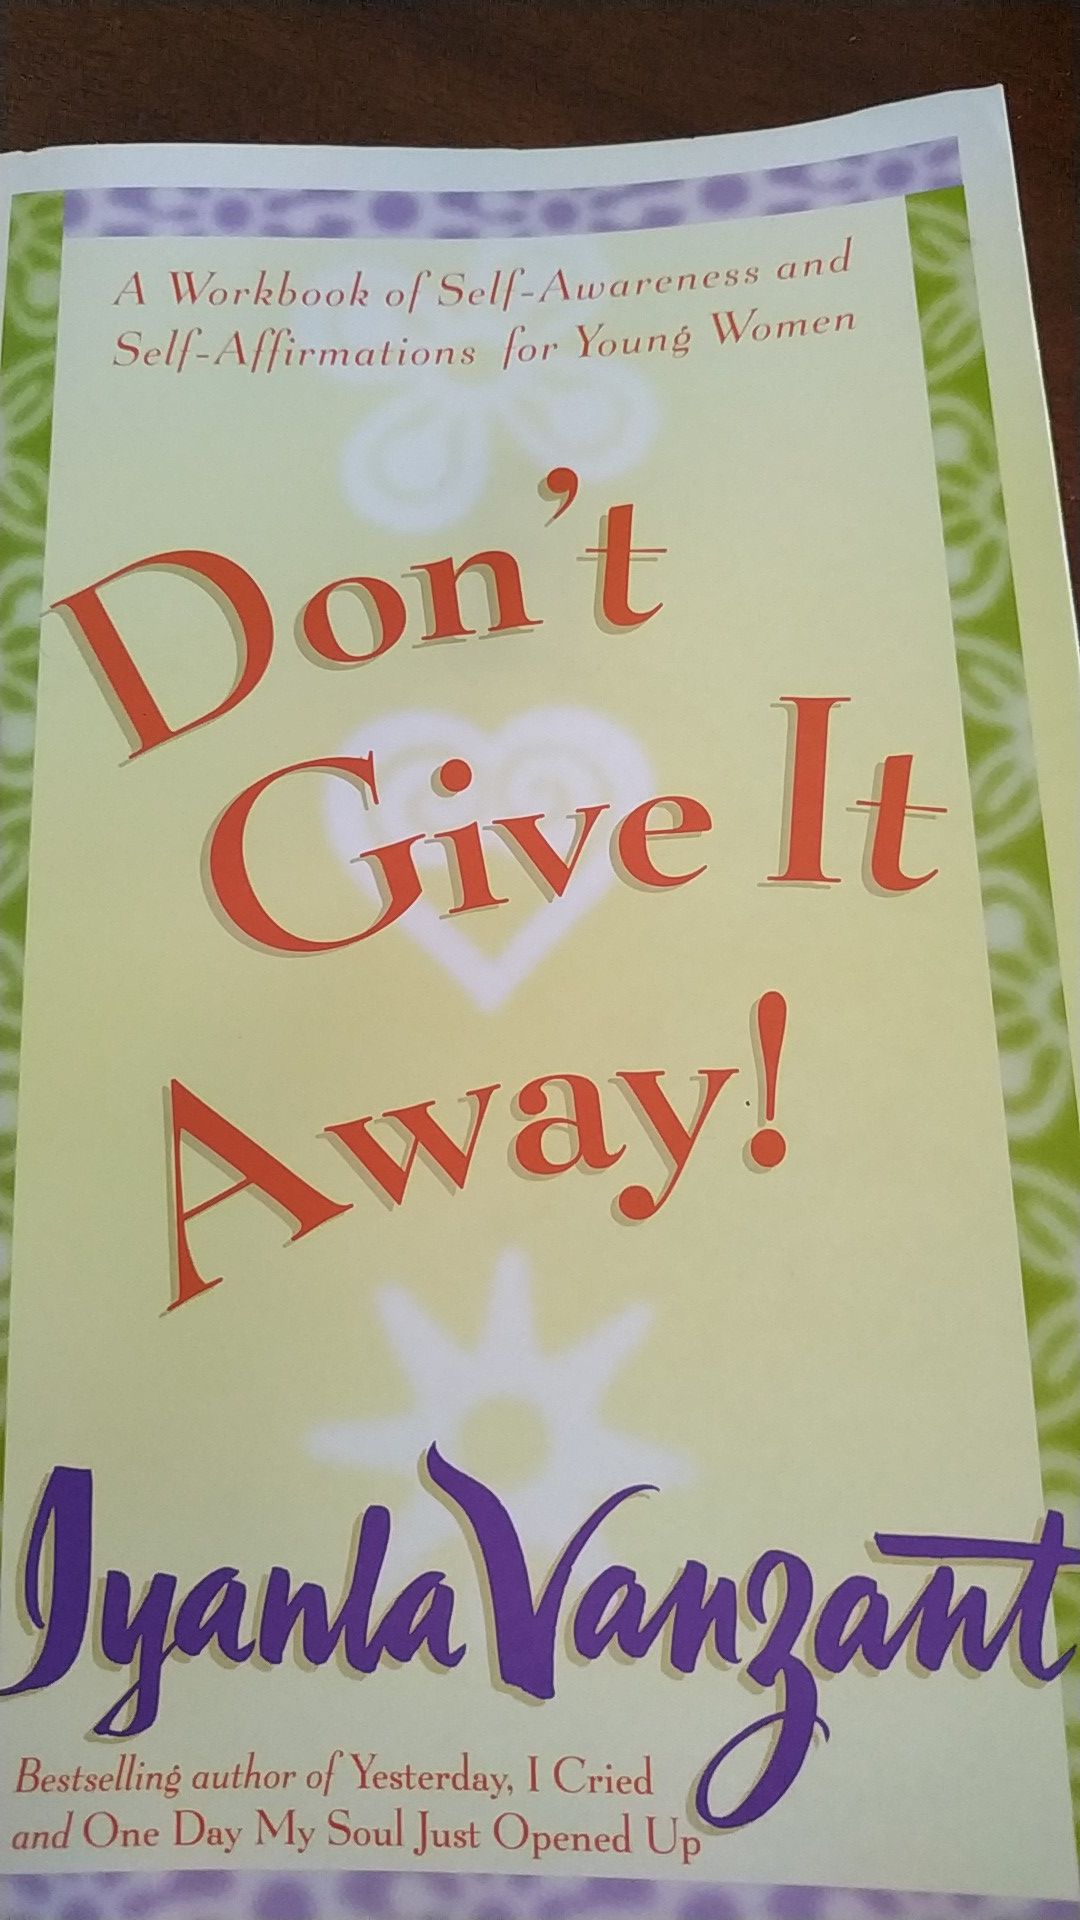 Do not give it away workbook